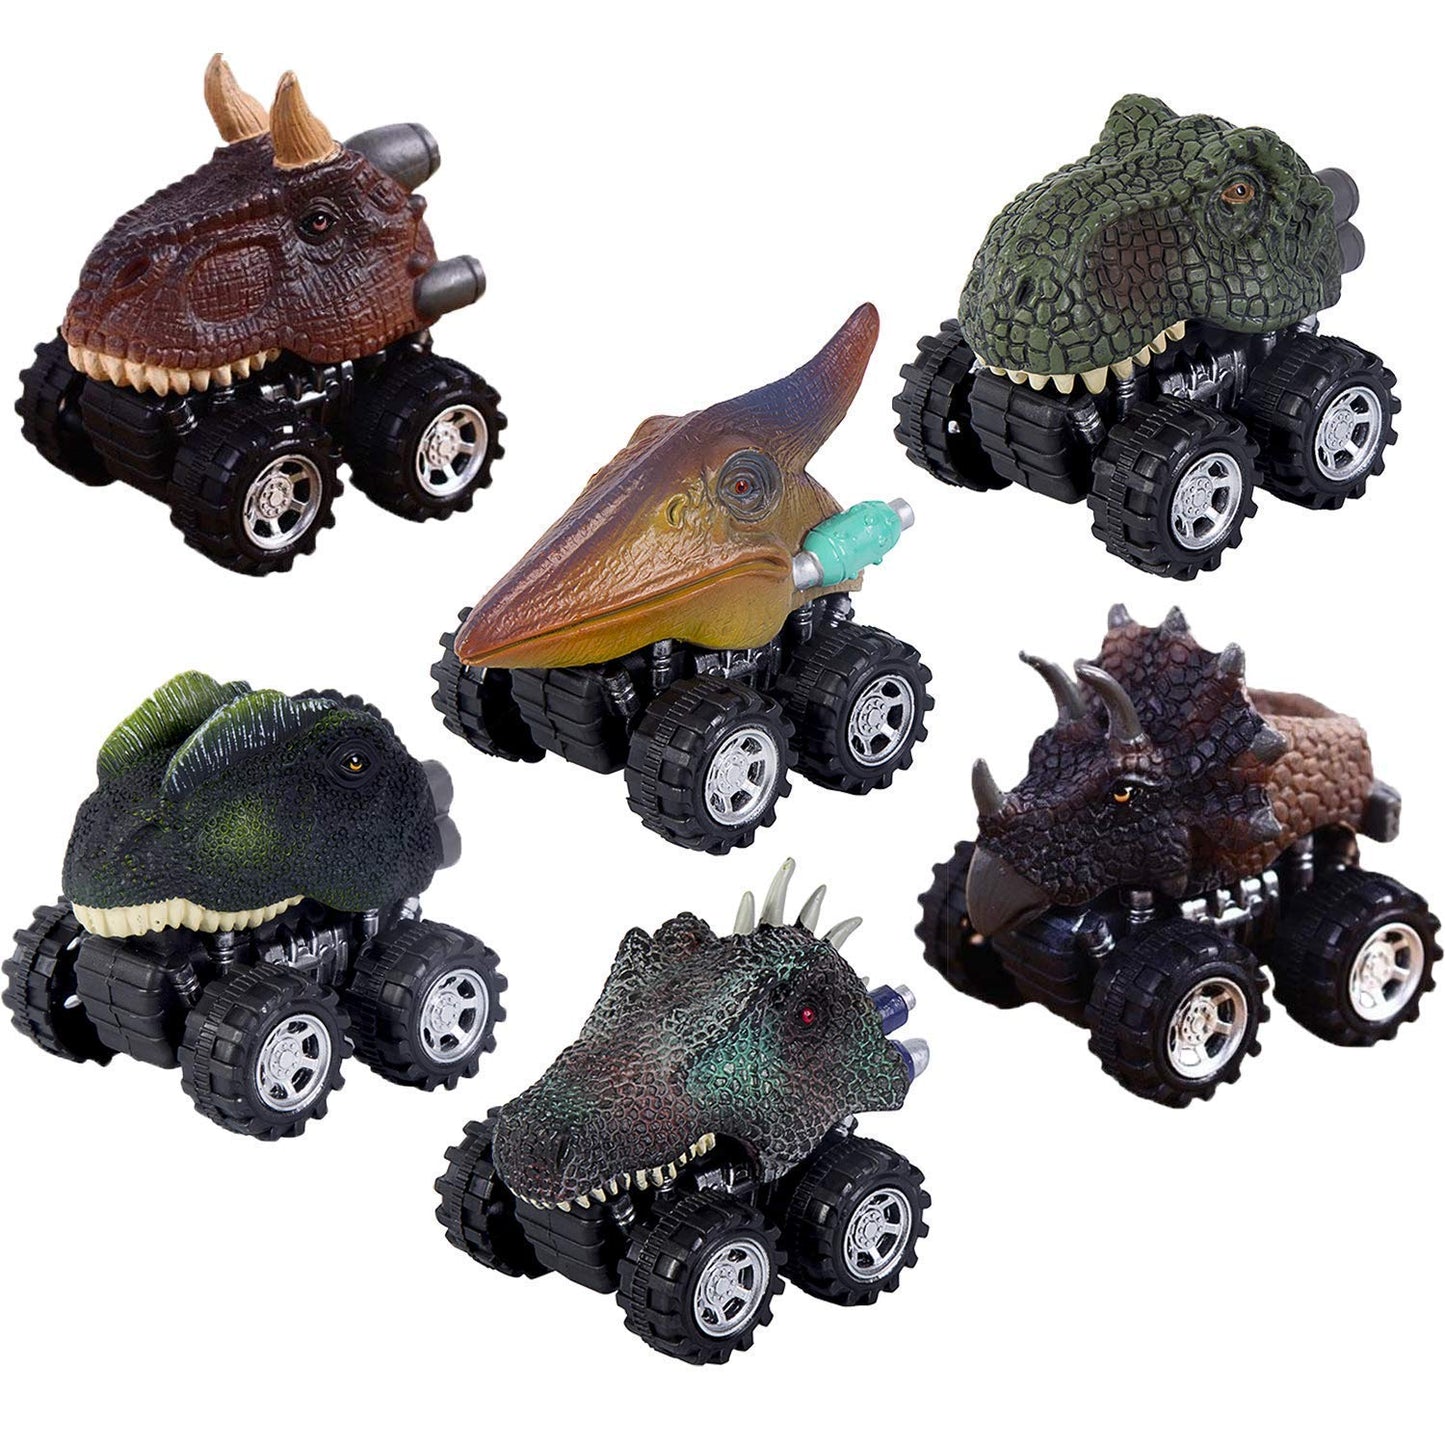 Aptoys Pull Back Dinosaur Cars 6-Pack Non-Toxic Plastic Dinosaur Cars Toys with Big Tire Wheel for 3-14 Year Old Kids Boys Girls Creative Gifts